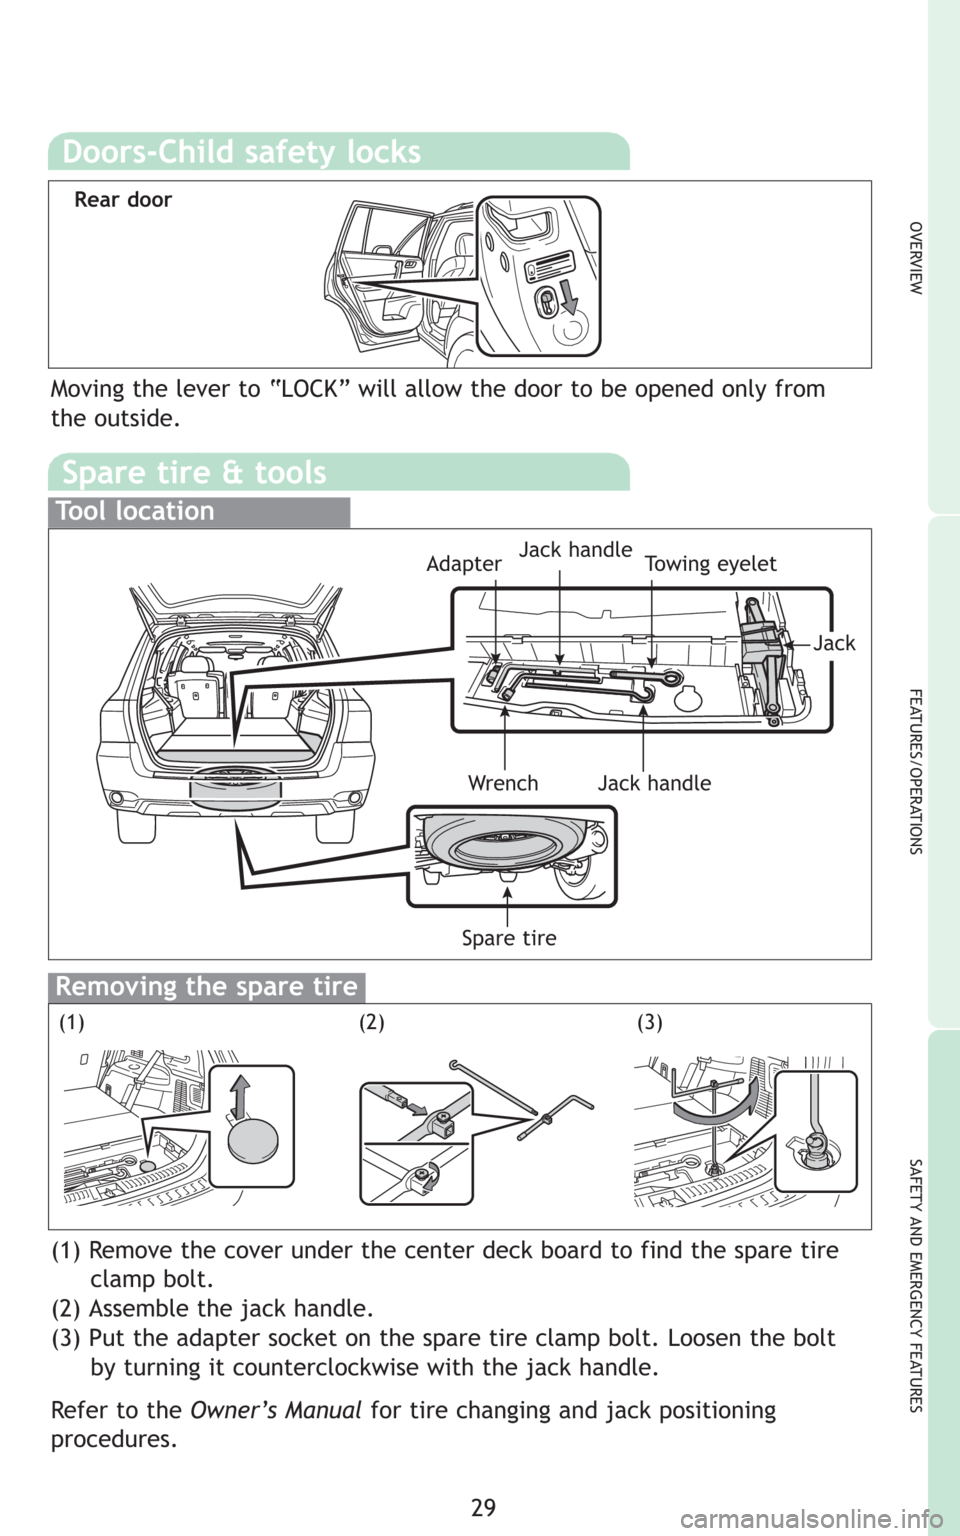 TOYOTA HIGHLANDER HYBRID 2008 XU40 / 2.G Quick Reference Guide 29
Spare tire & tools
Tool location
Removing the spare tire
(1) Remove the cover under the center deck board to find the spare tire
clamp bolt.
(2) Assemble the jack handle.
(3) Put the adapter socket